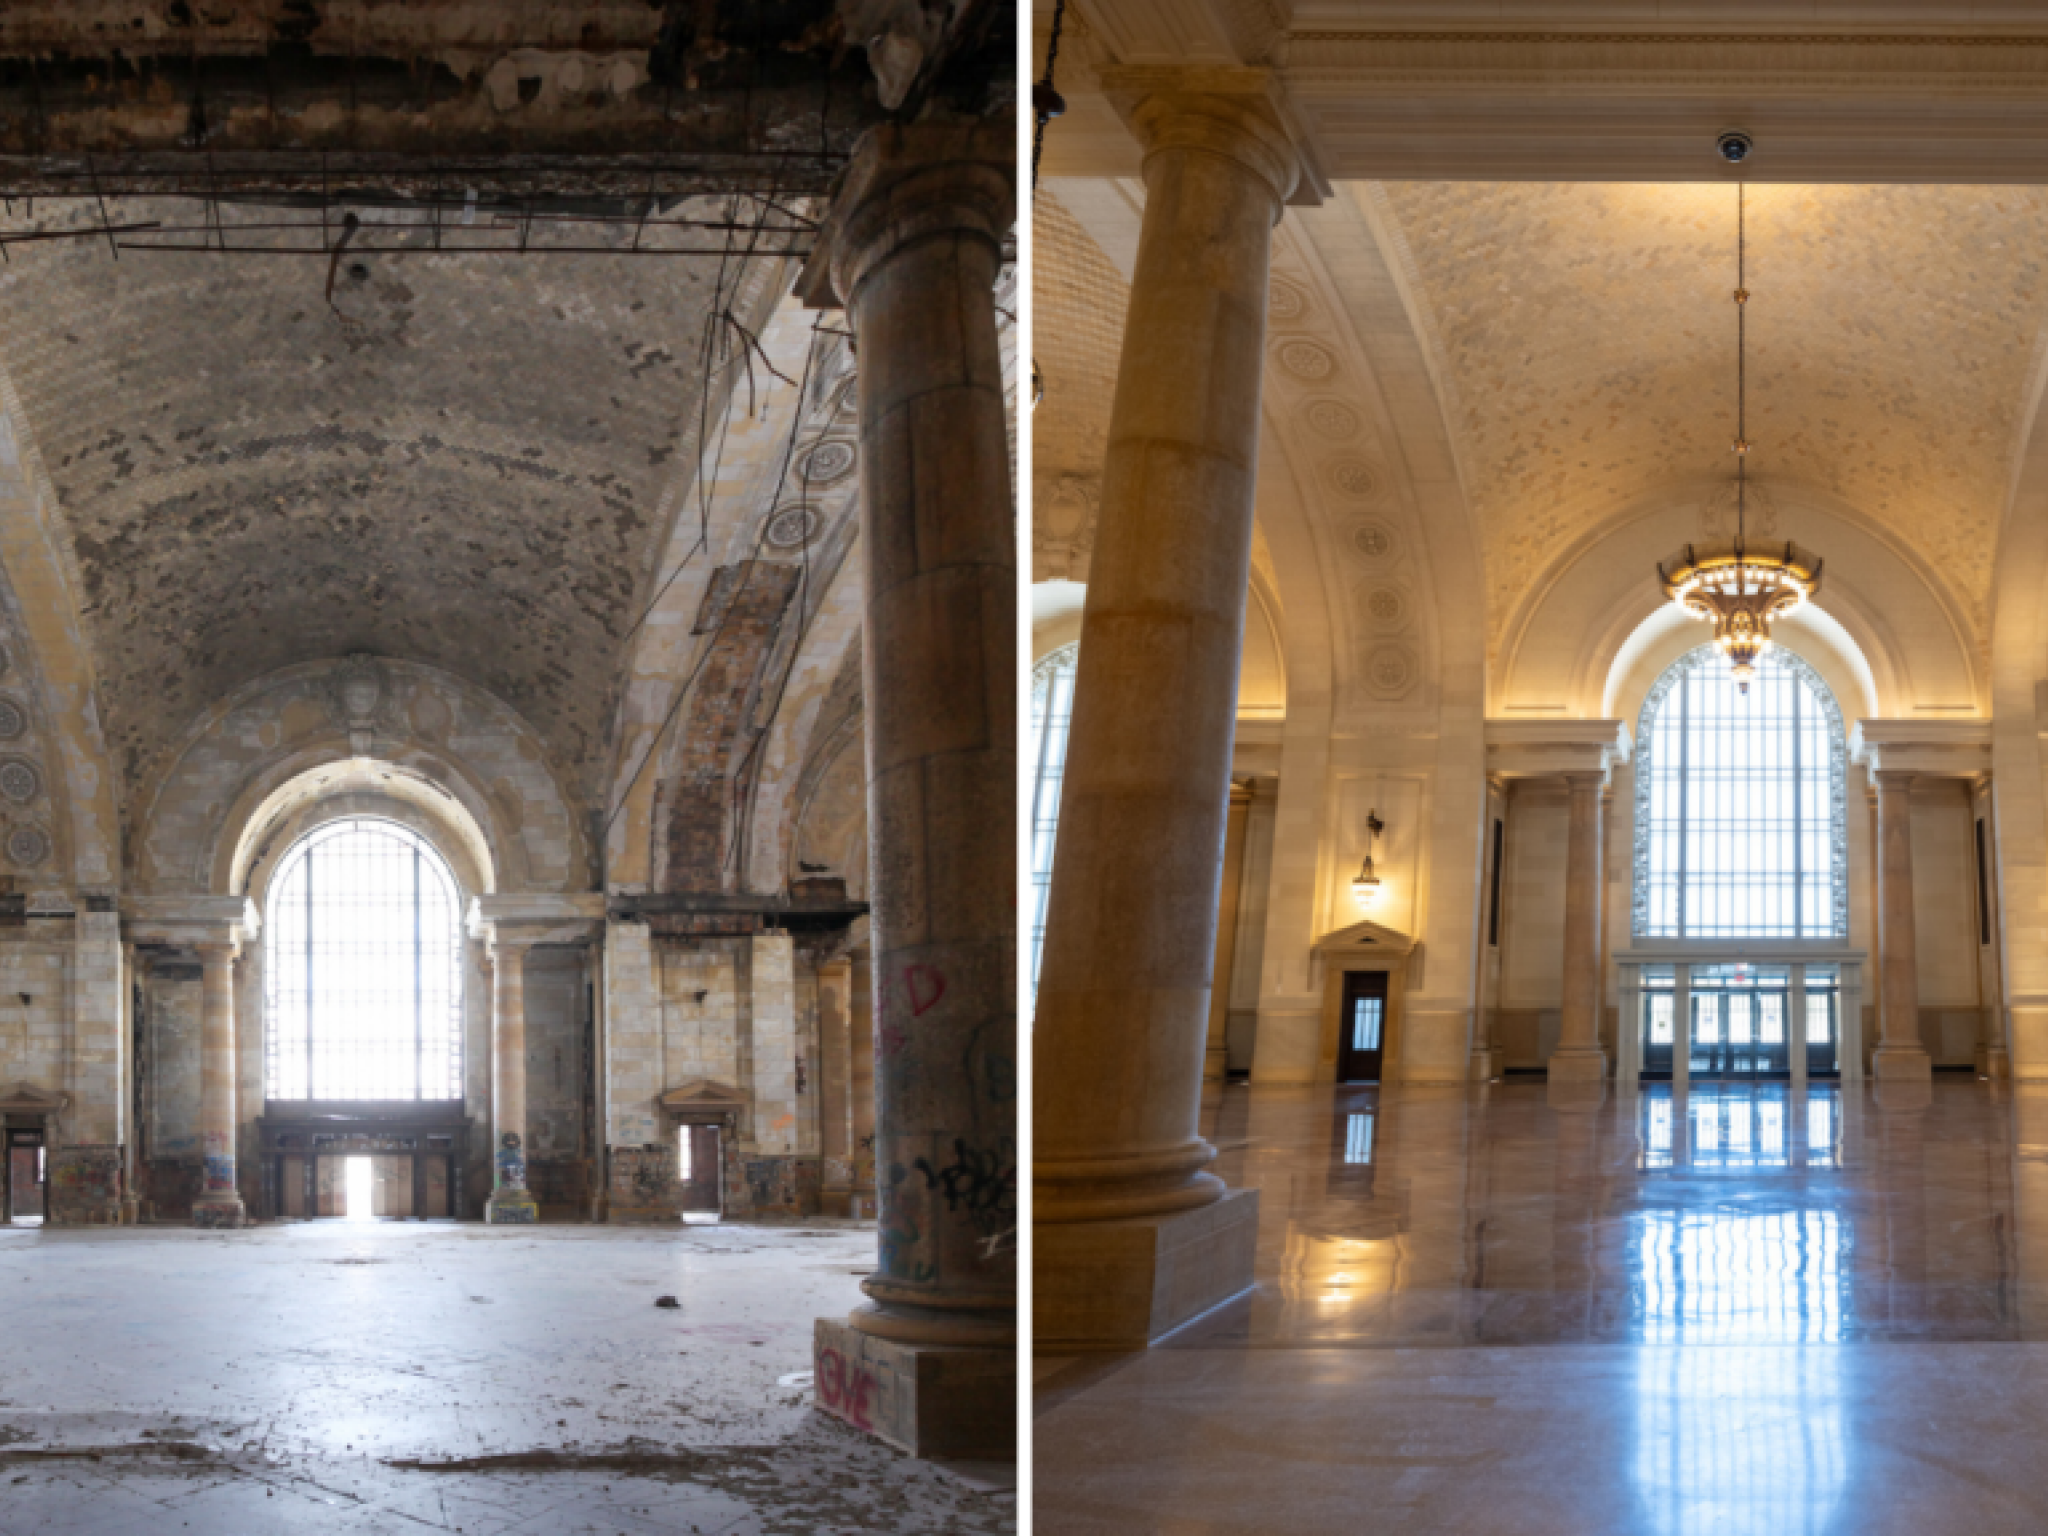  ford-reveals-900m-renovated-michigan-central-station-project-diana-ross-jack-white-to-headline-opening-concert-at-detroit-landmark 